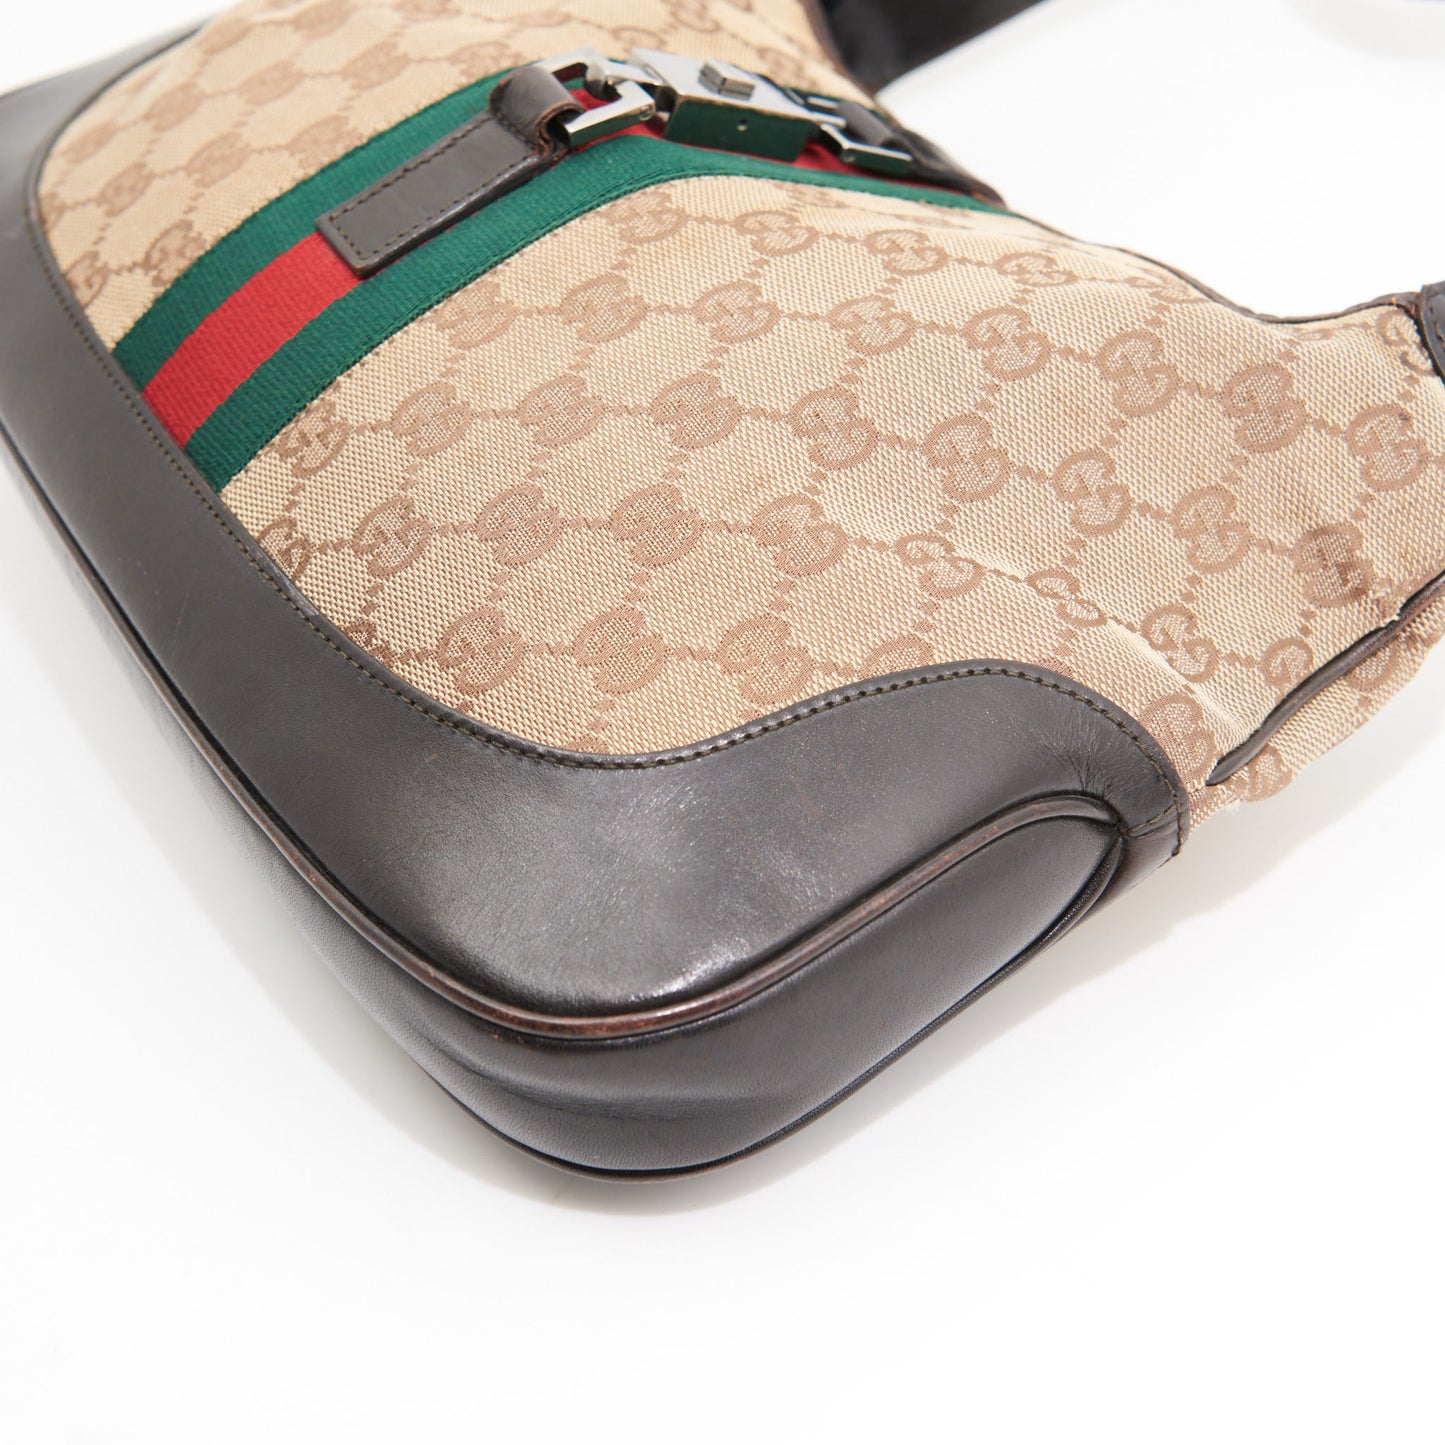 Gucci Canvas Jackie-O in Brown Gucci Monogram SHW